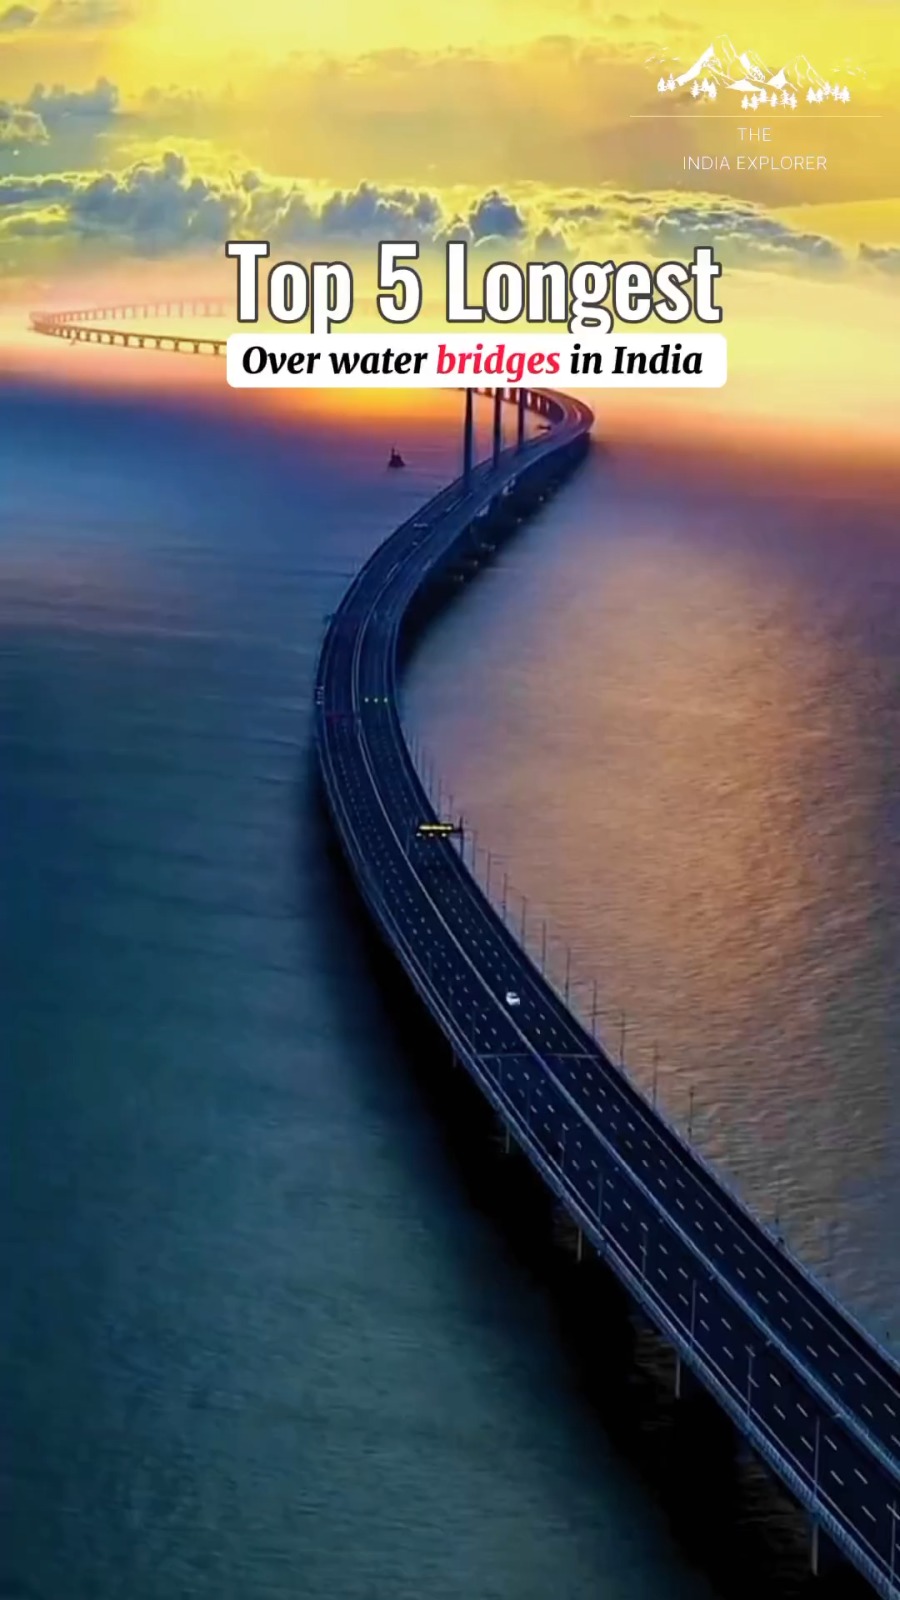 📍These are the 5 longest bridges in India that are constructed over water.